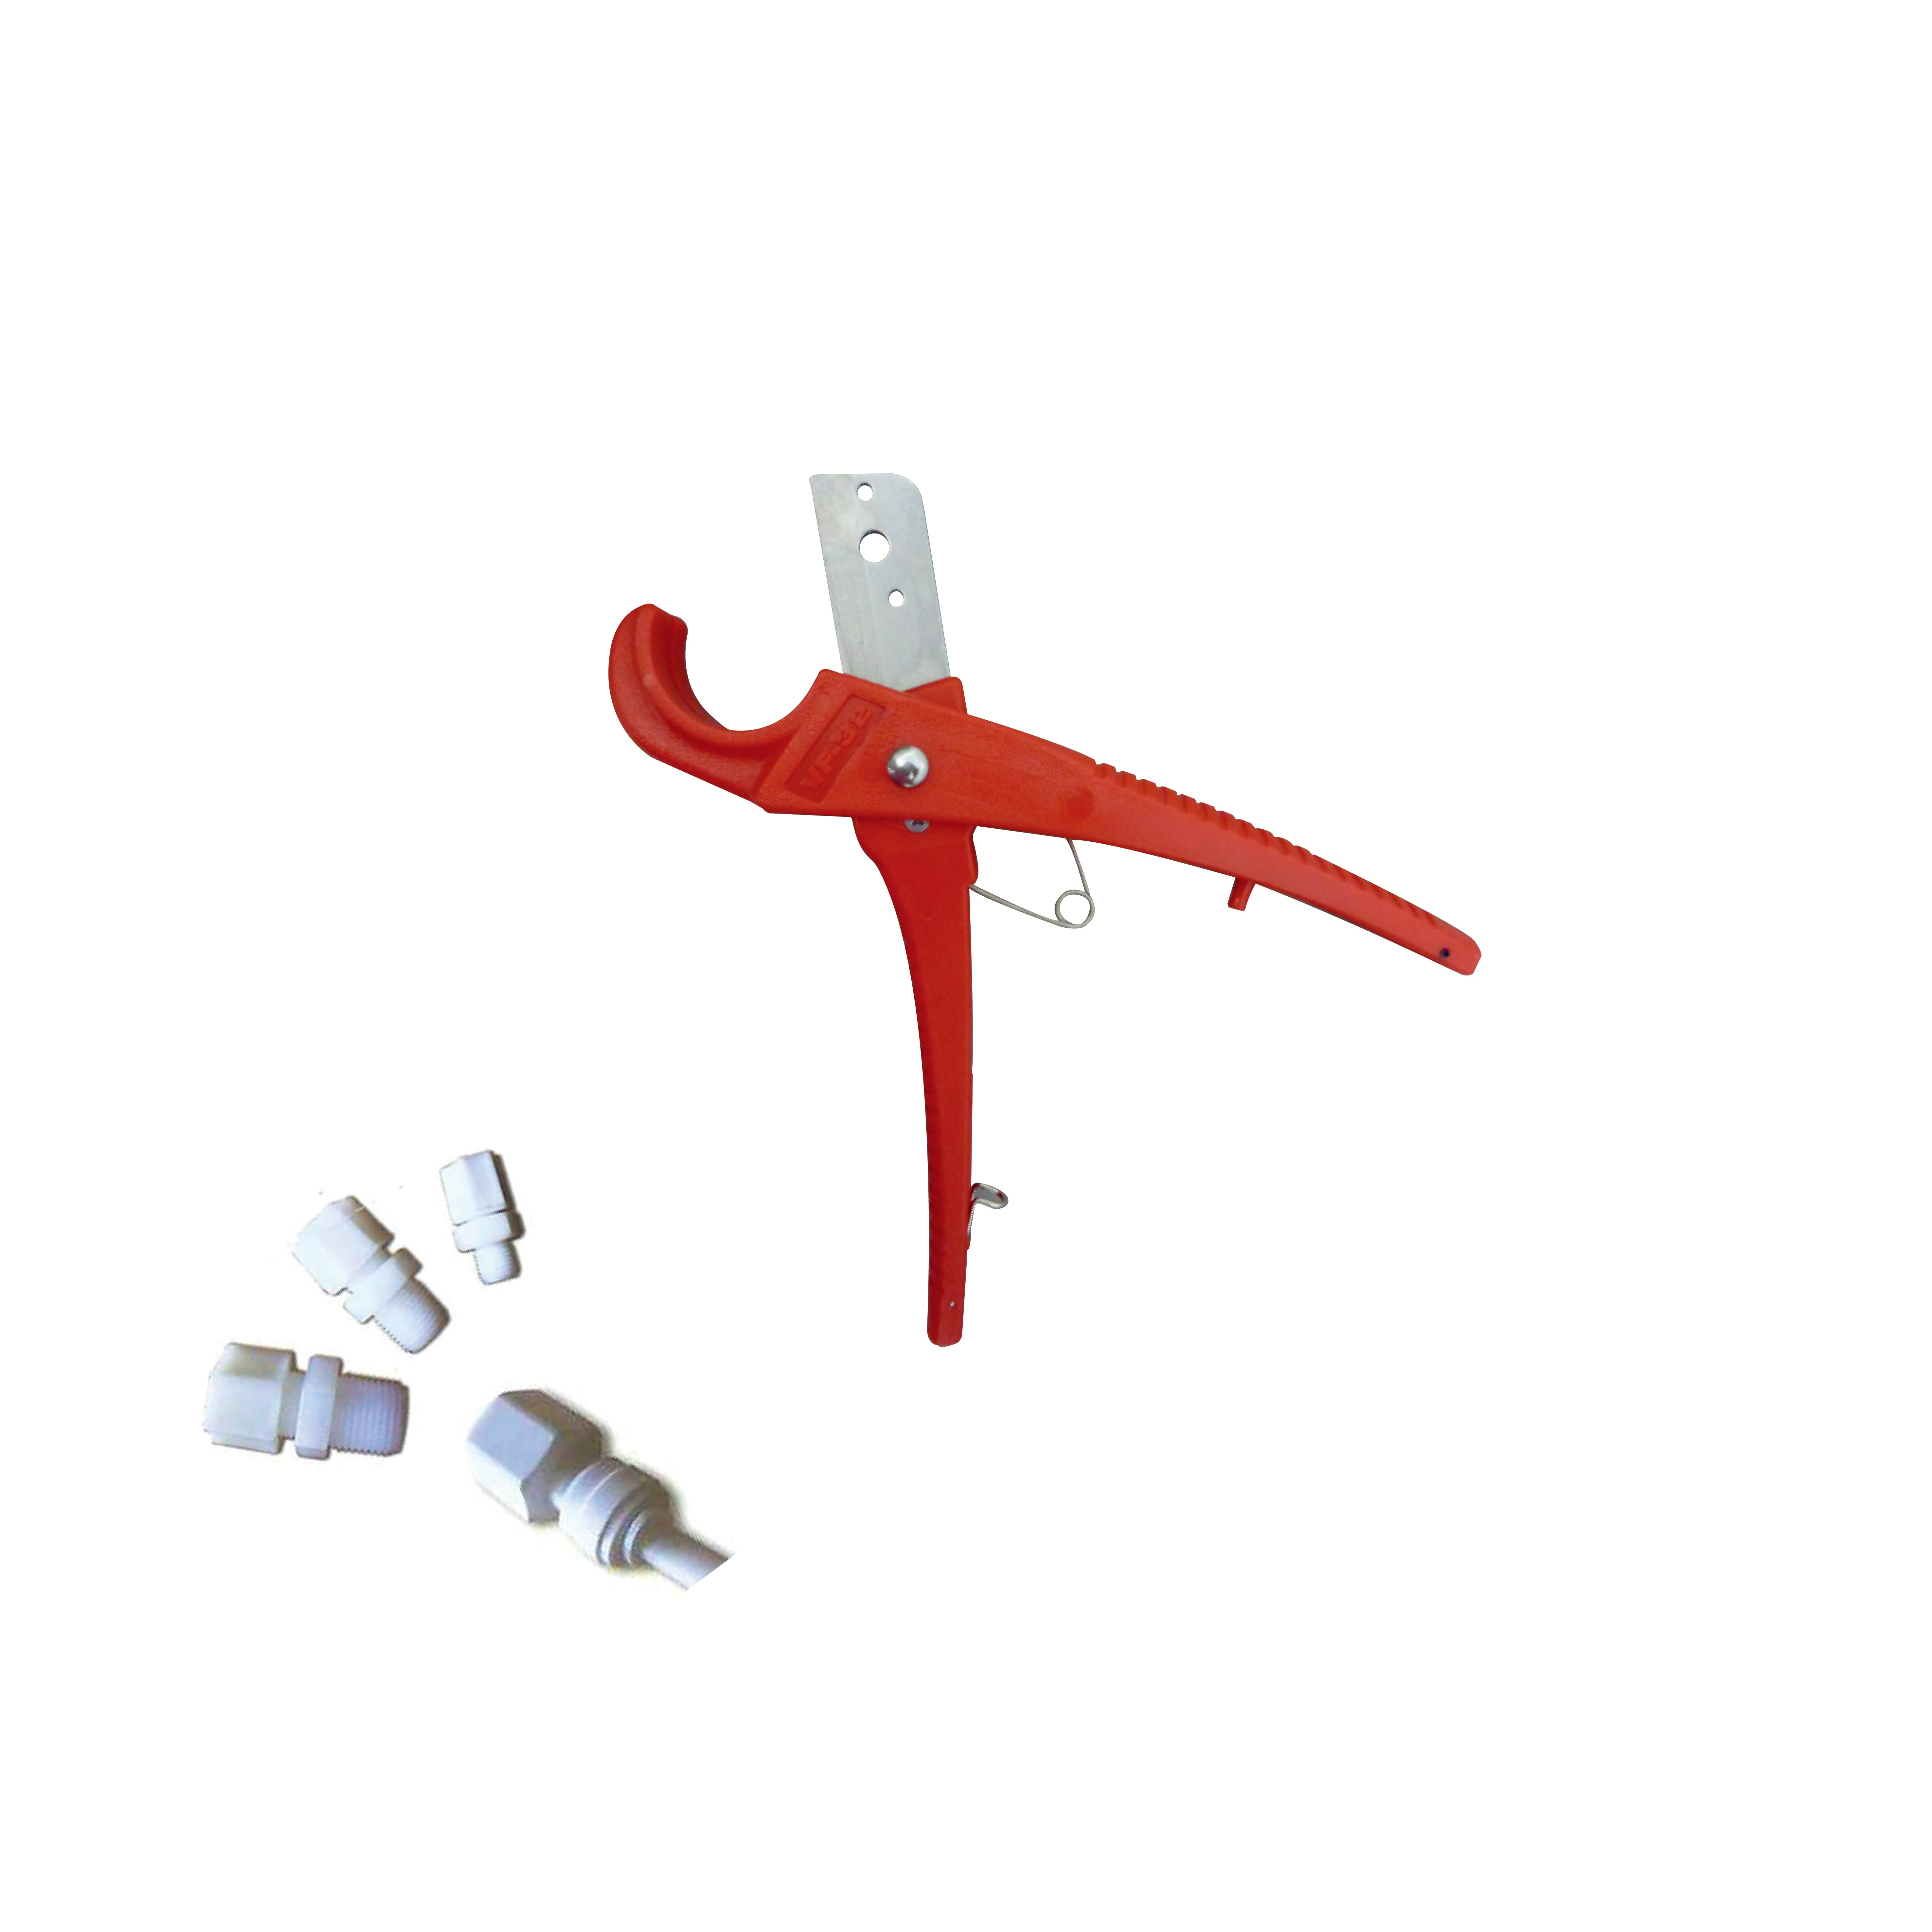 PVC pipe and soft tube cutters